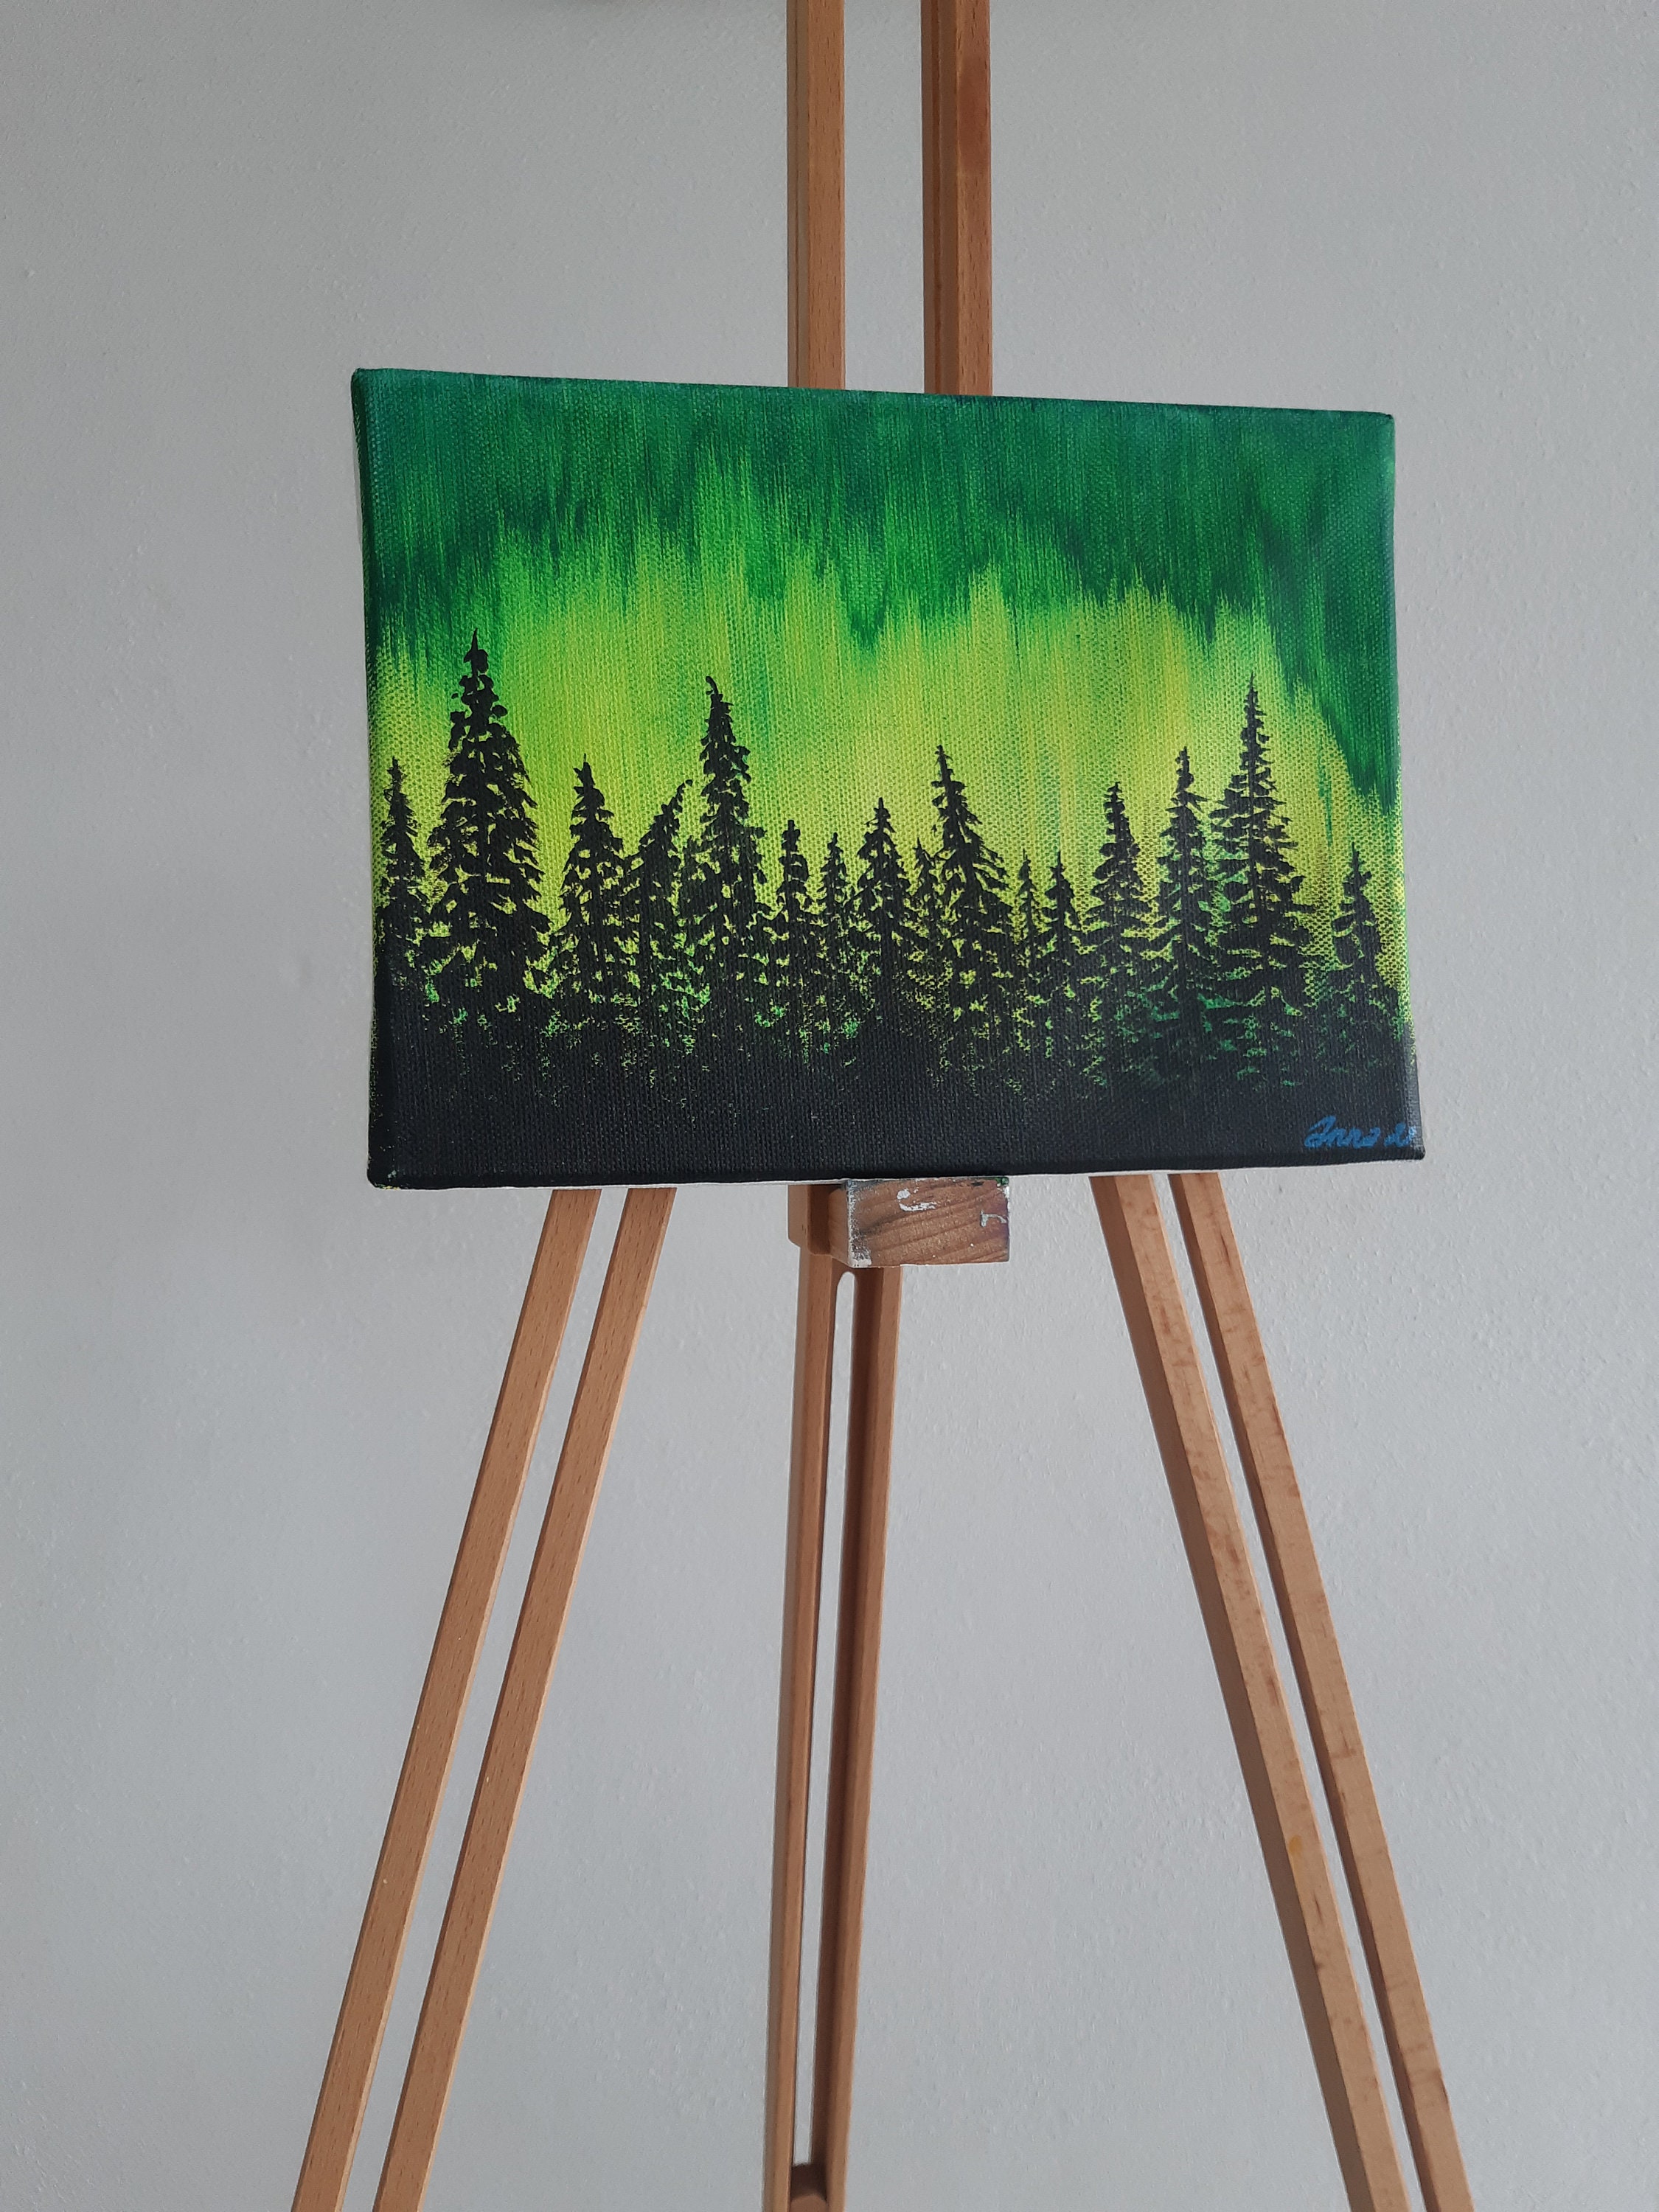 Mini Canvas Painting, Gift Aesthetic Northern Lights Canvas